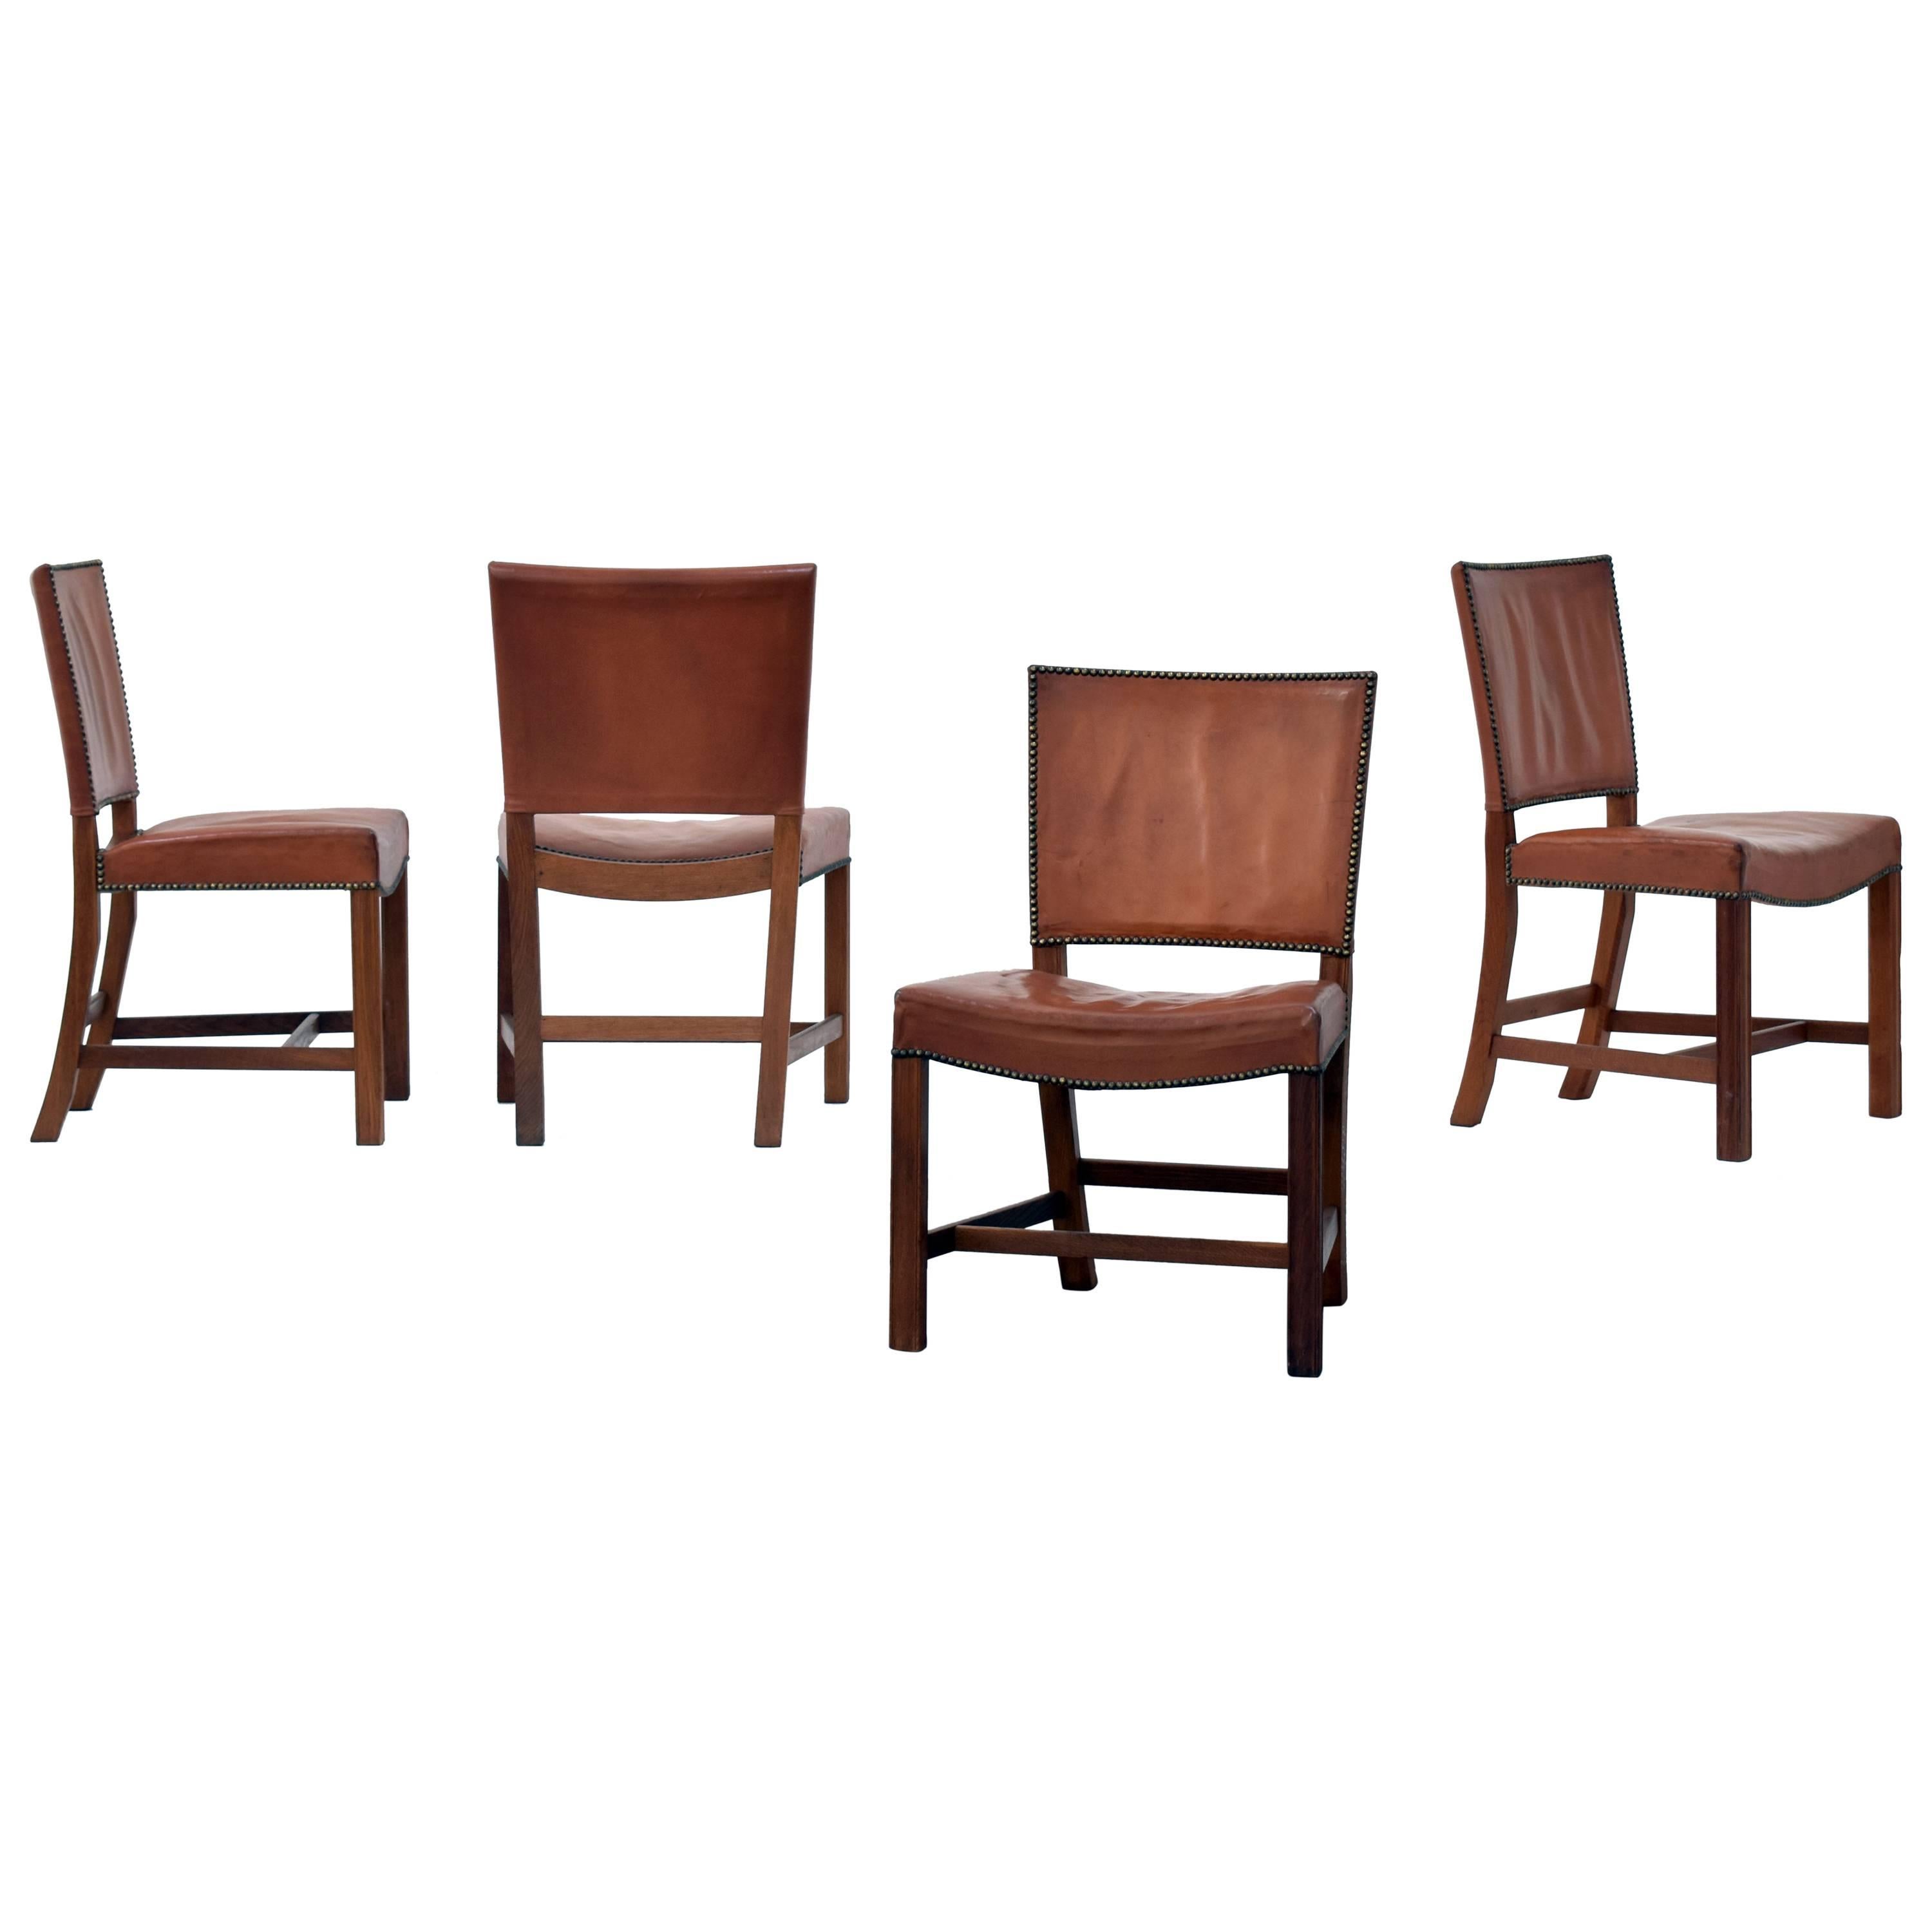 Kaare Klint, Four Large Barcelona or Leather Dining Chairs, Mahogany, 1950s